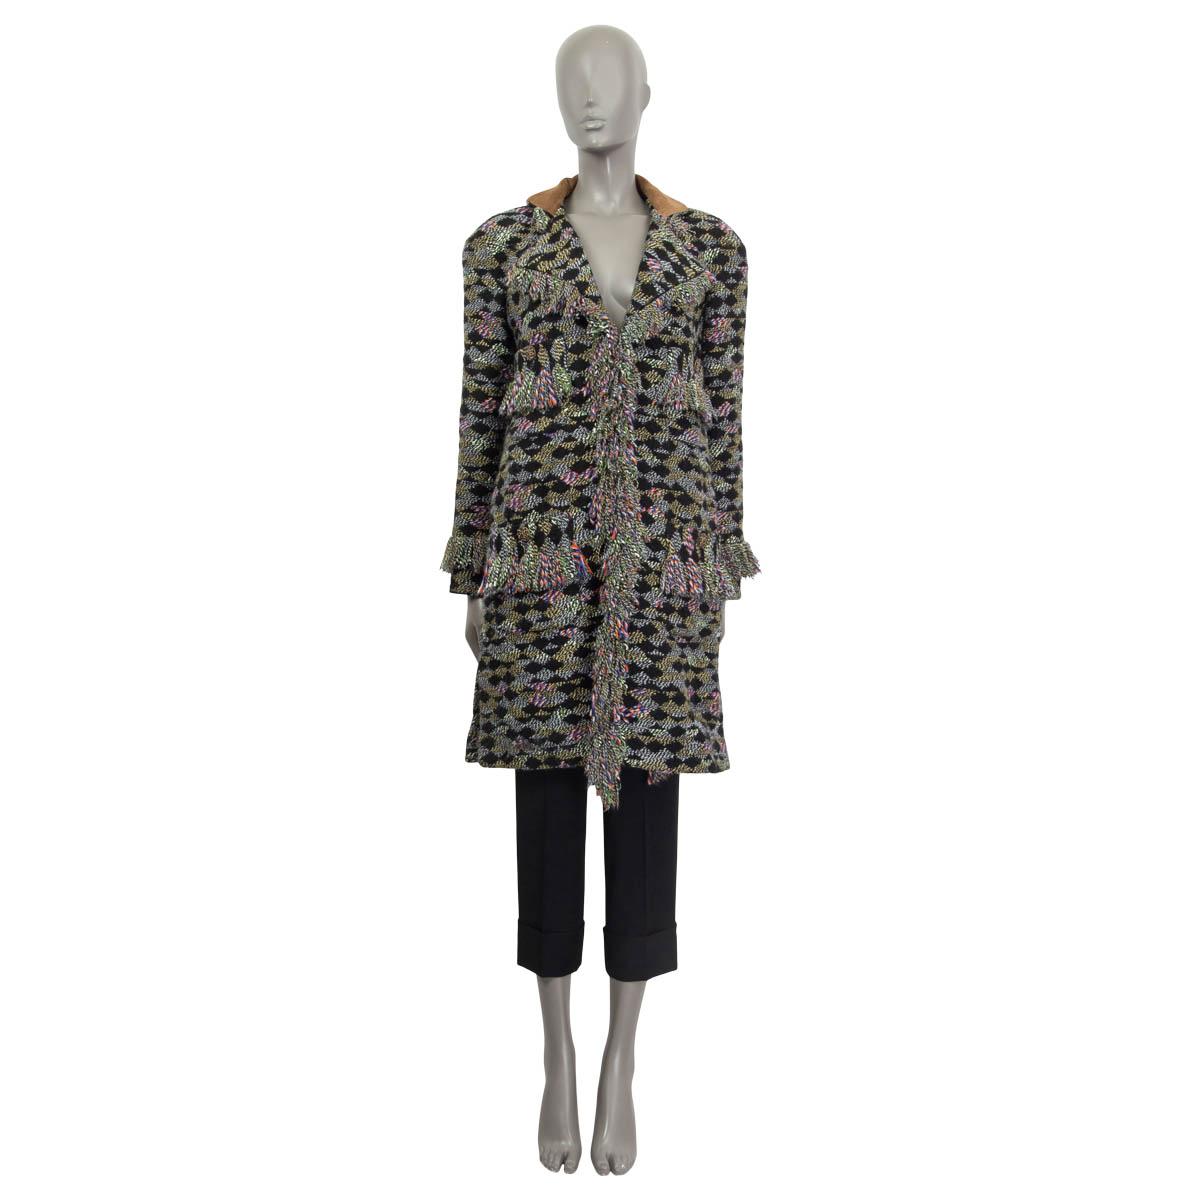 100% authentic Chanel 2015 Salzburg fringed knit coat in black, green, white, orange, yellow and blue acrylic (69%), wool (17%), nylon (5%), silk (5%) and mohair (4%). Features four buttoned pockets on the front and fringe embellishments. Lined in